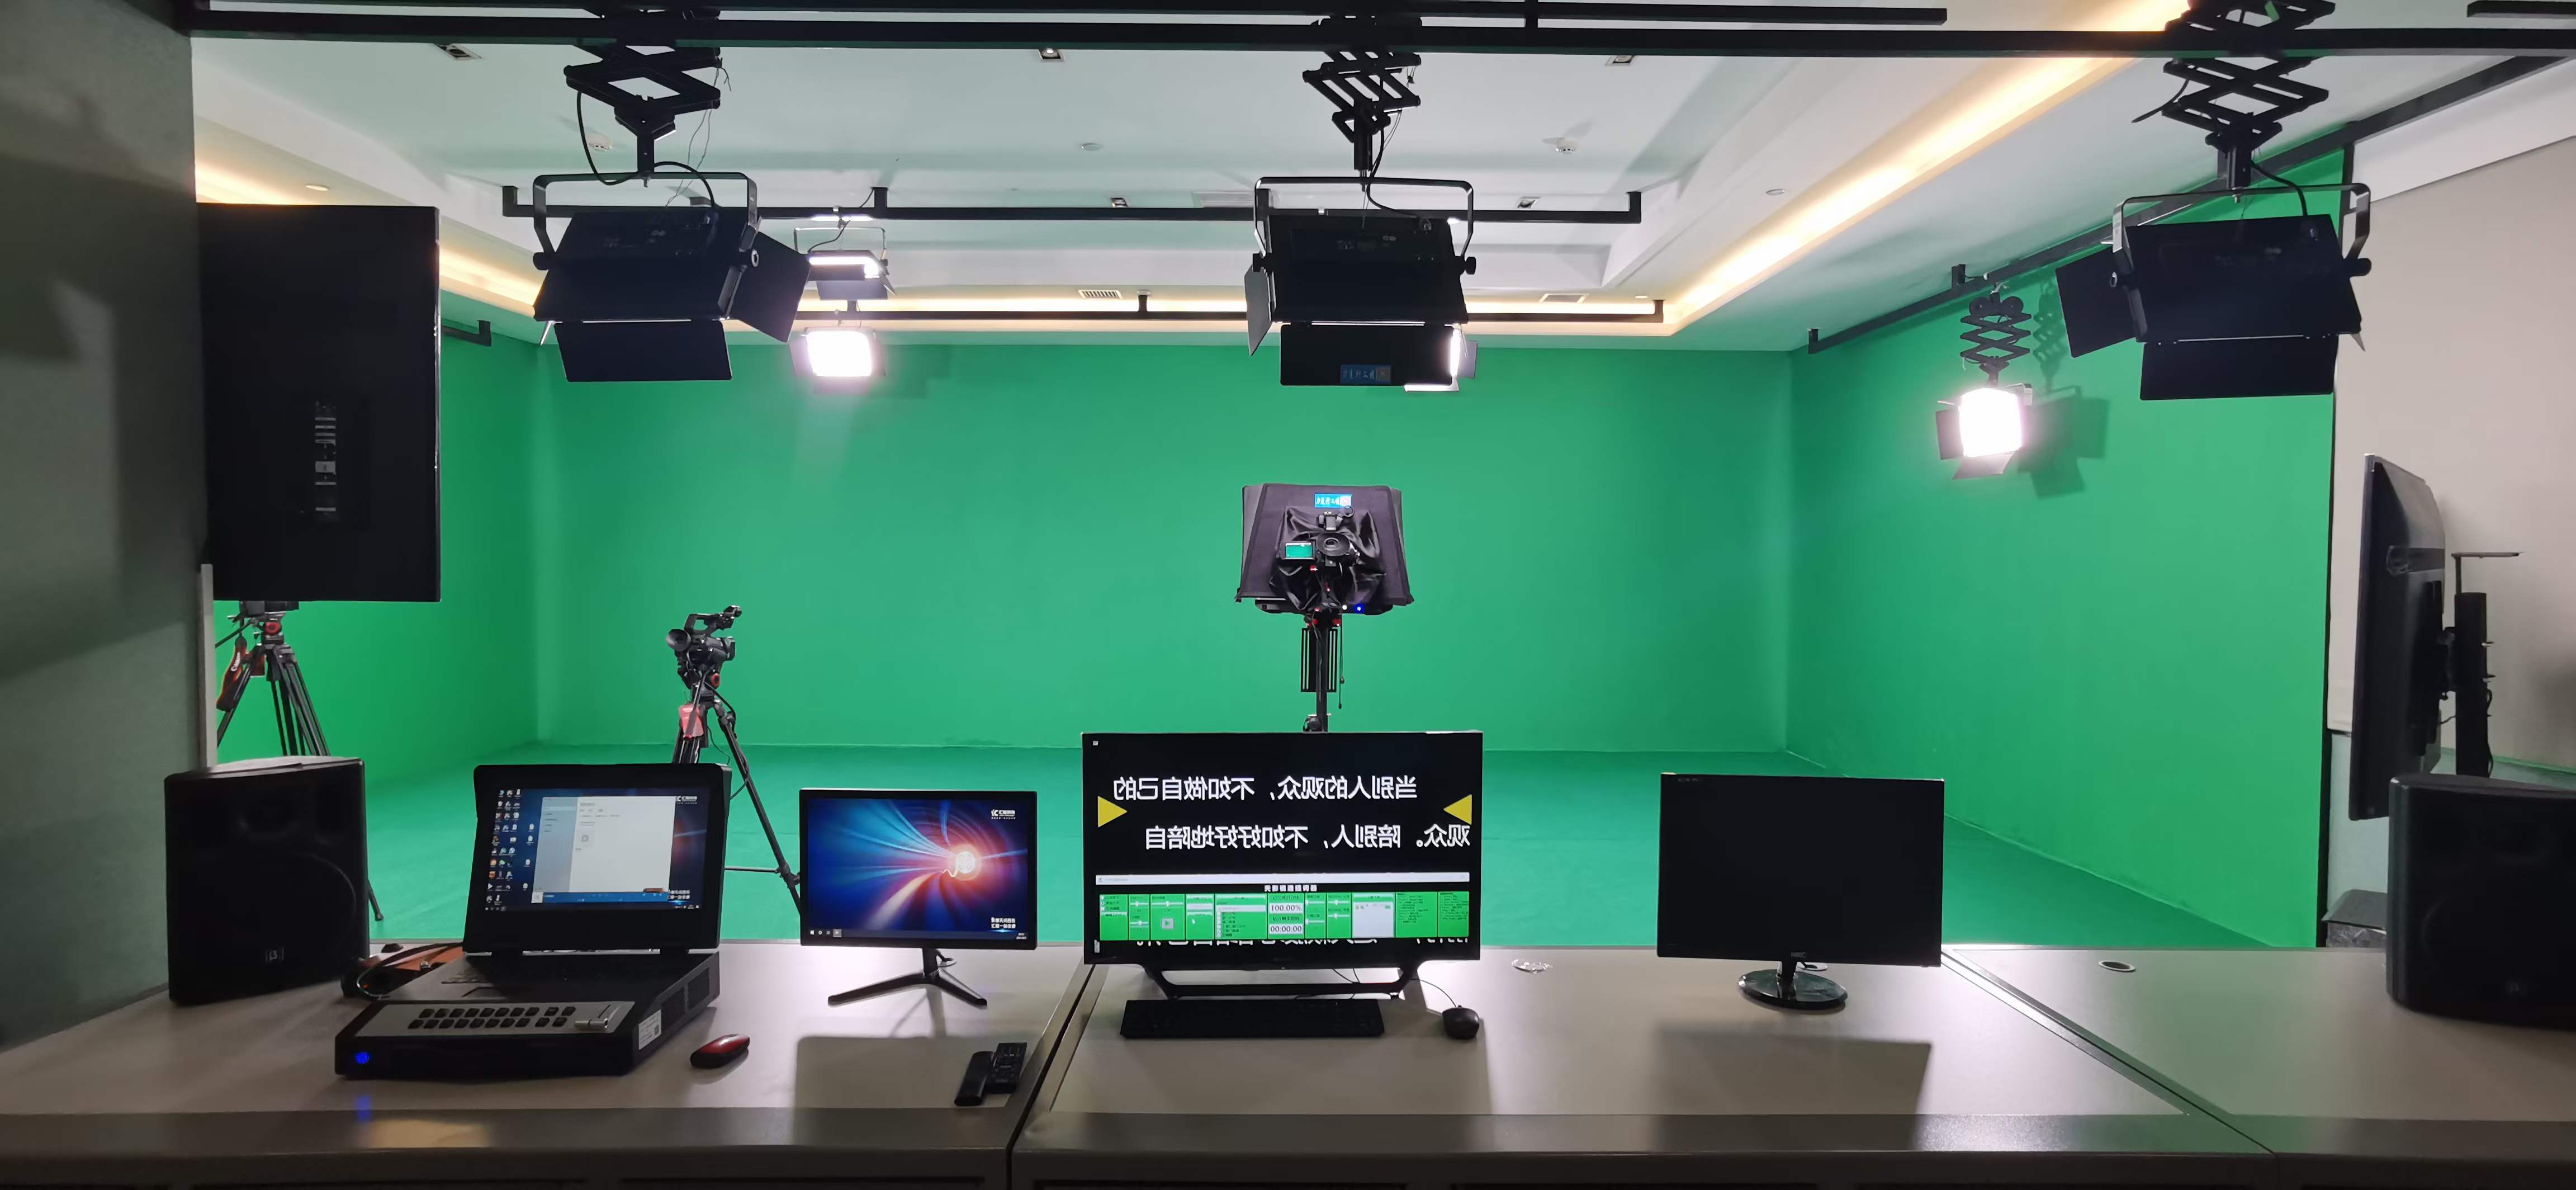 How to use LED soft lights in the studio?